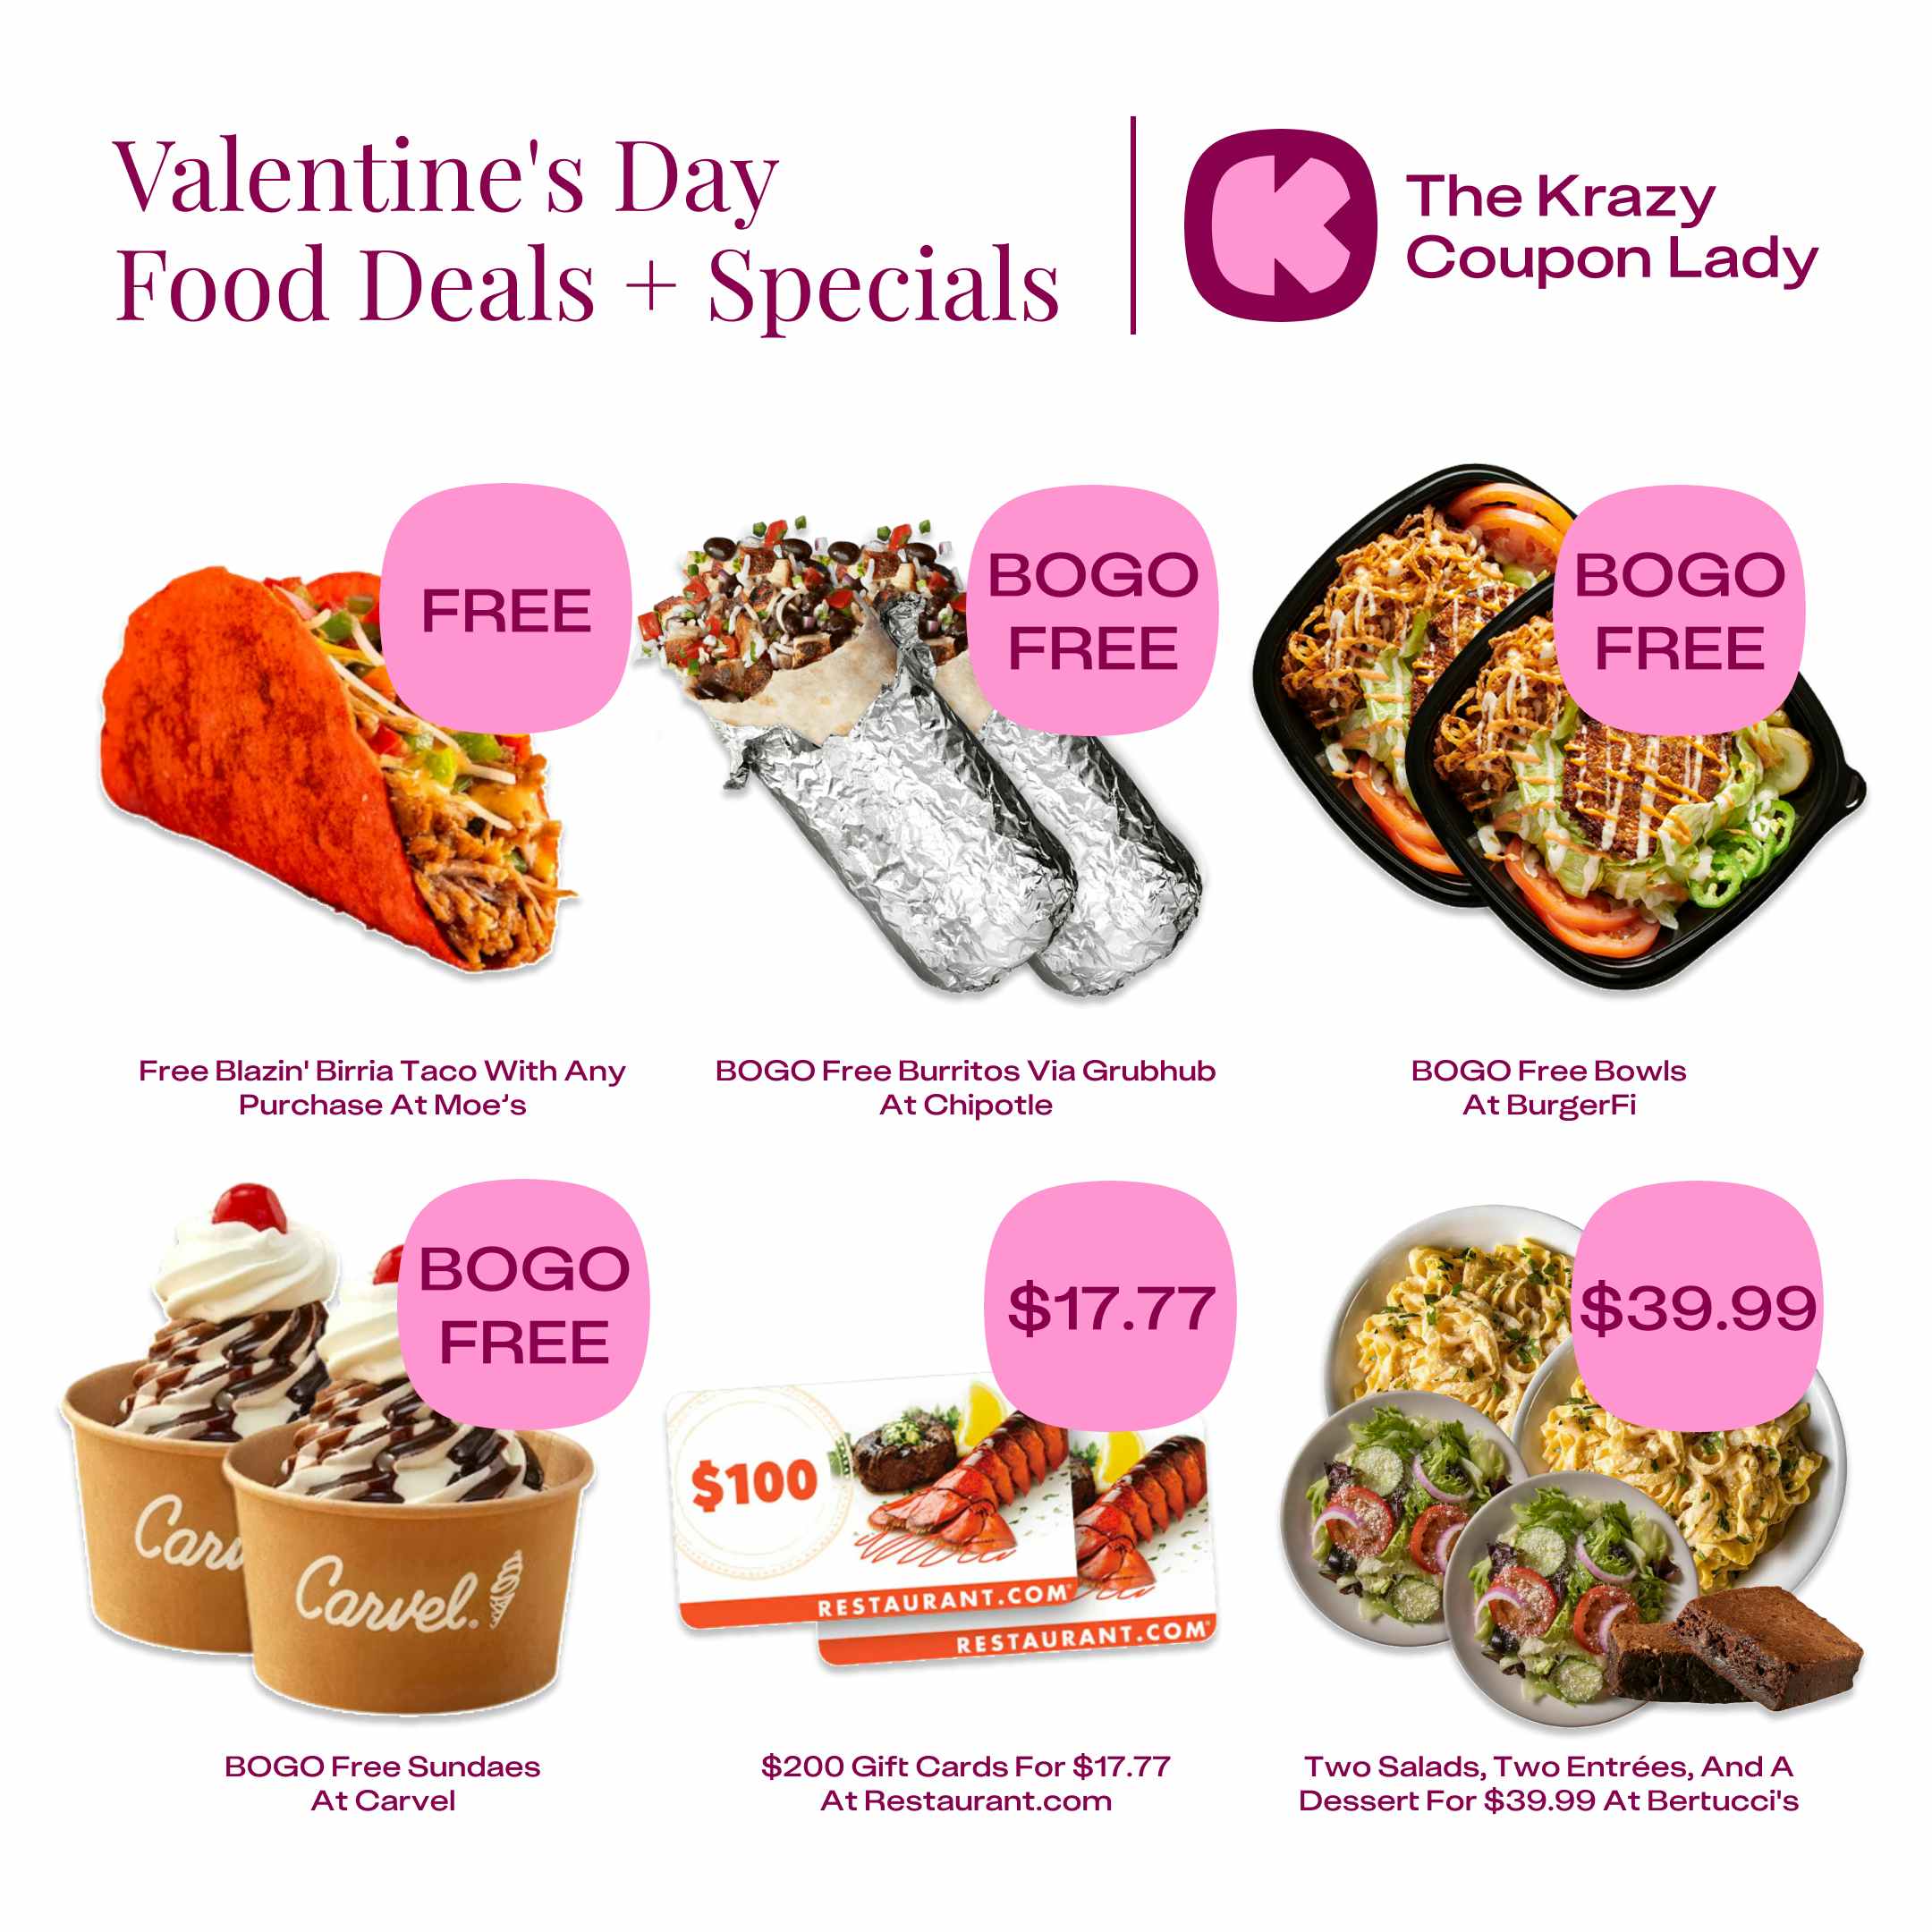 Valentines-Day-Food-Deals-and-Specials